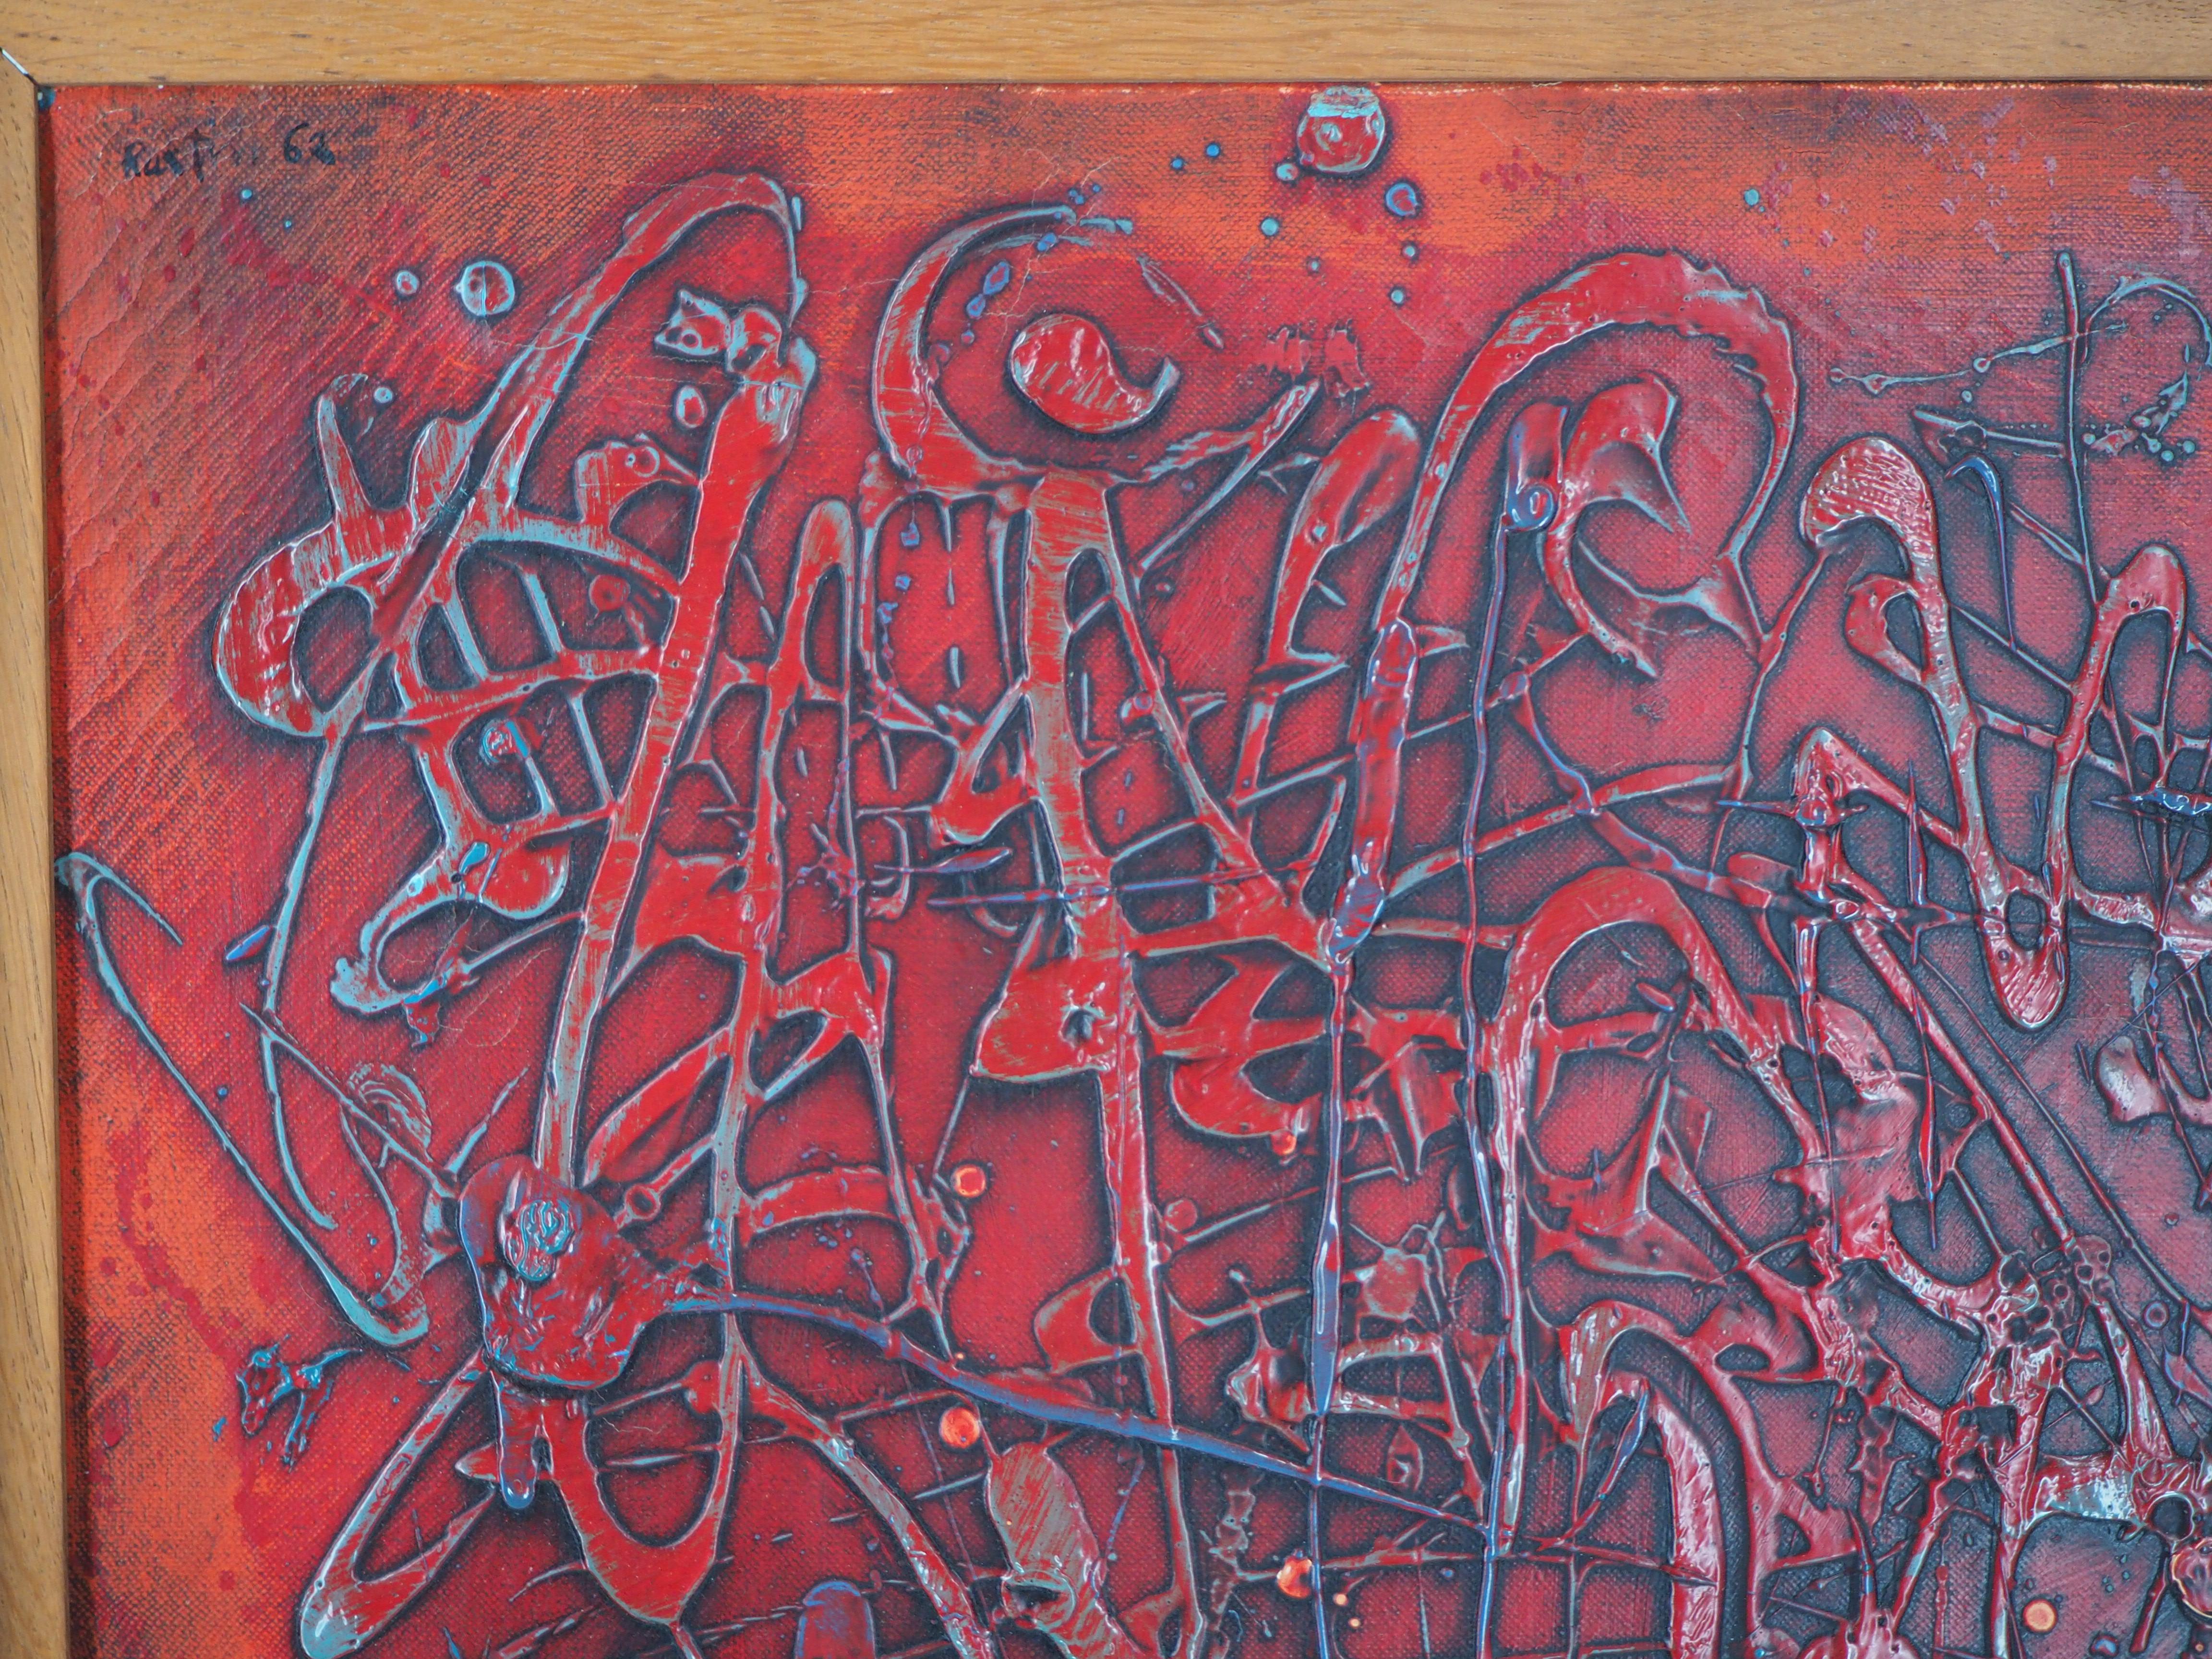 Abstraction in Red - Original oil on canvas - Signed - Brown Abstract Painting by Jean Rustin